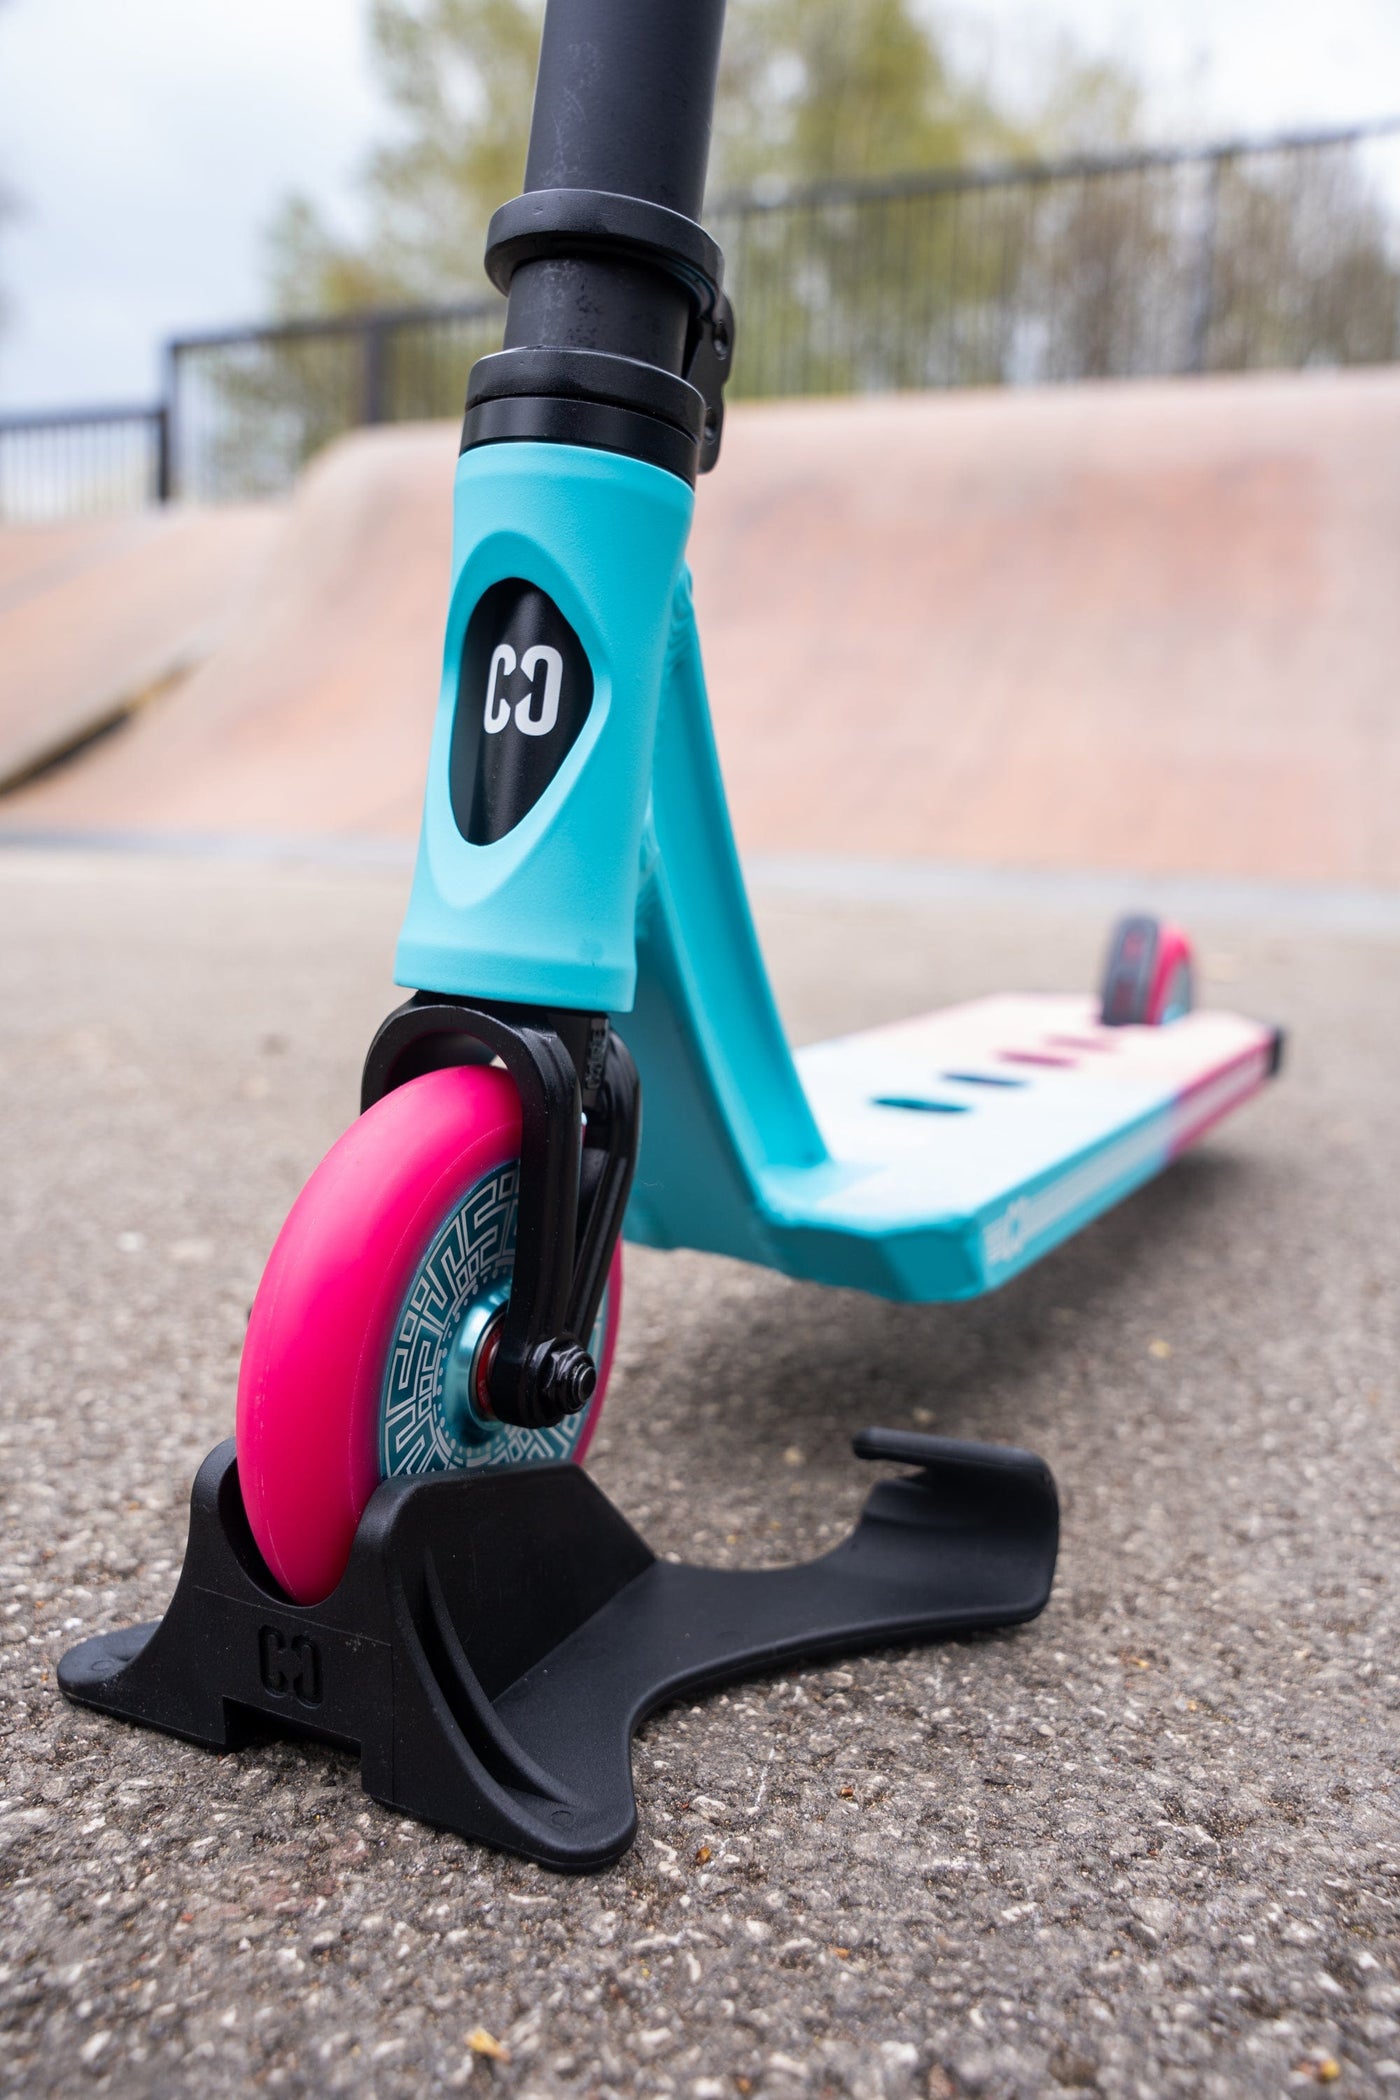 CORE Scooter Wall Floor Stand BlackI Scooter Stand Product In Use